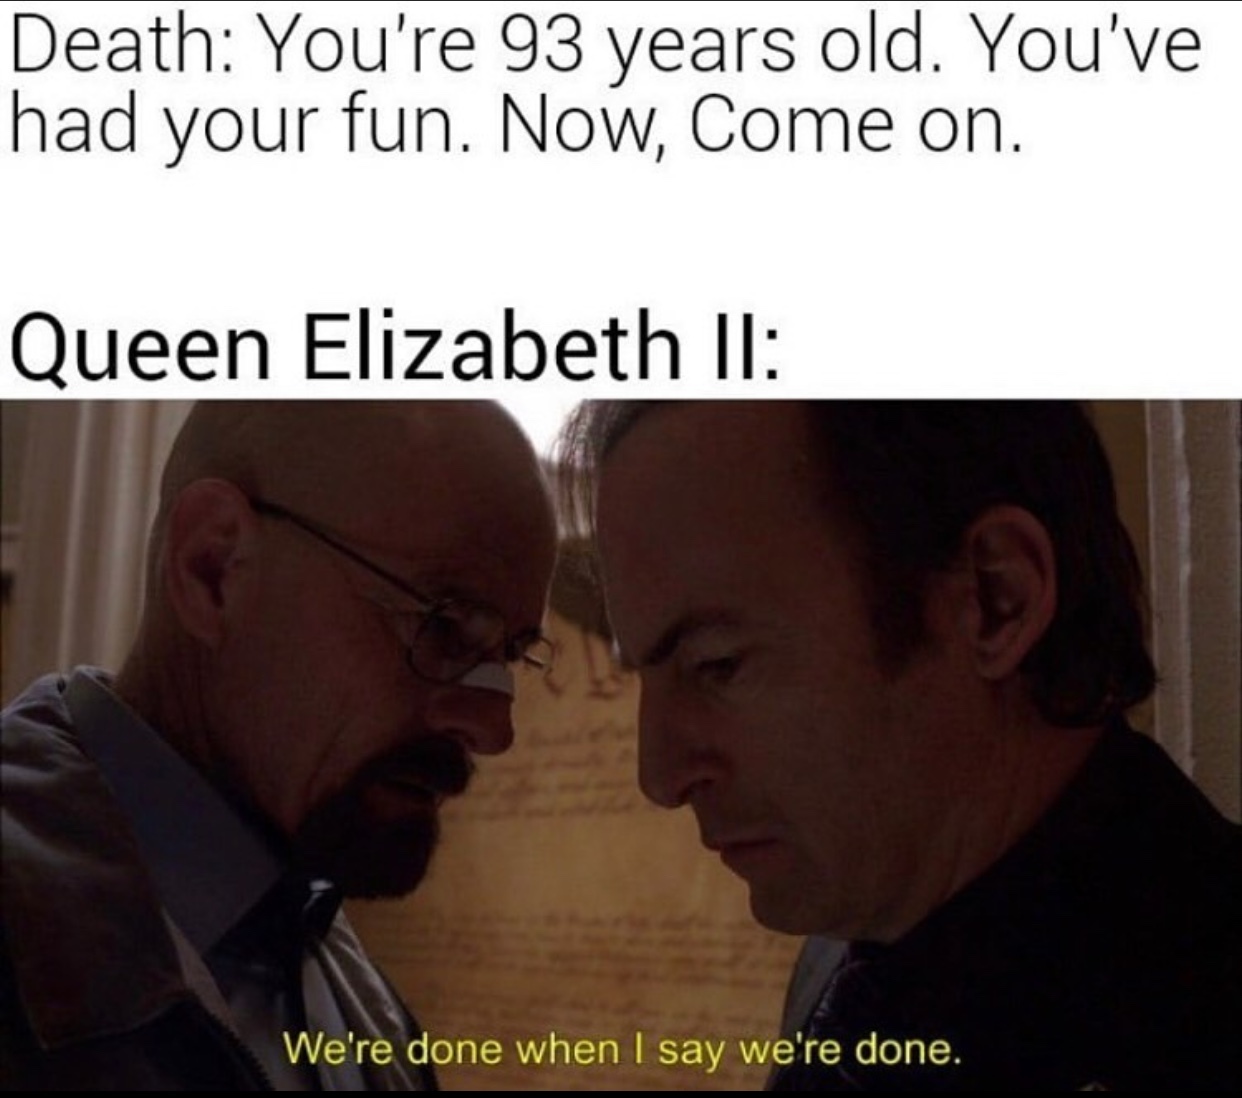 queen Elizabeth drinks the blood of the young in order to live longer - meme